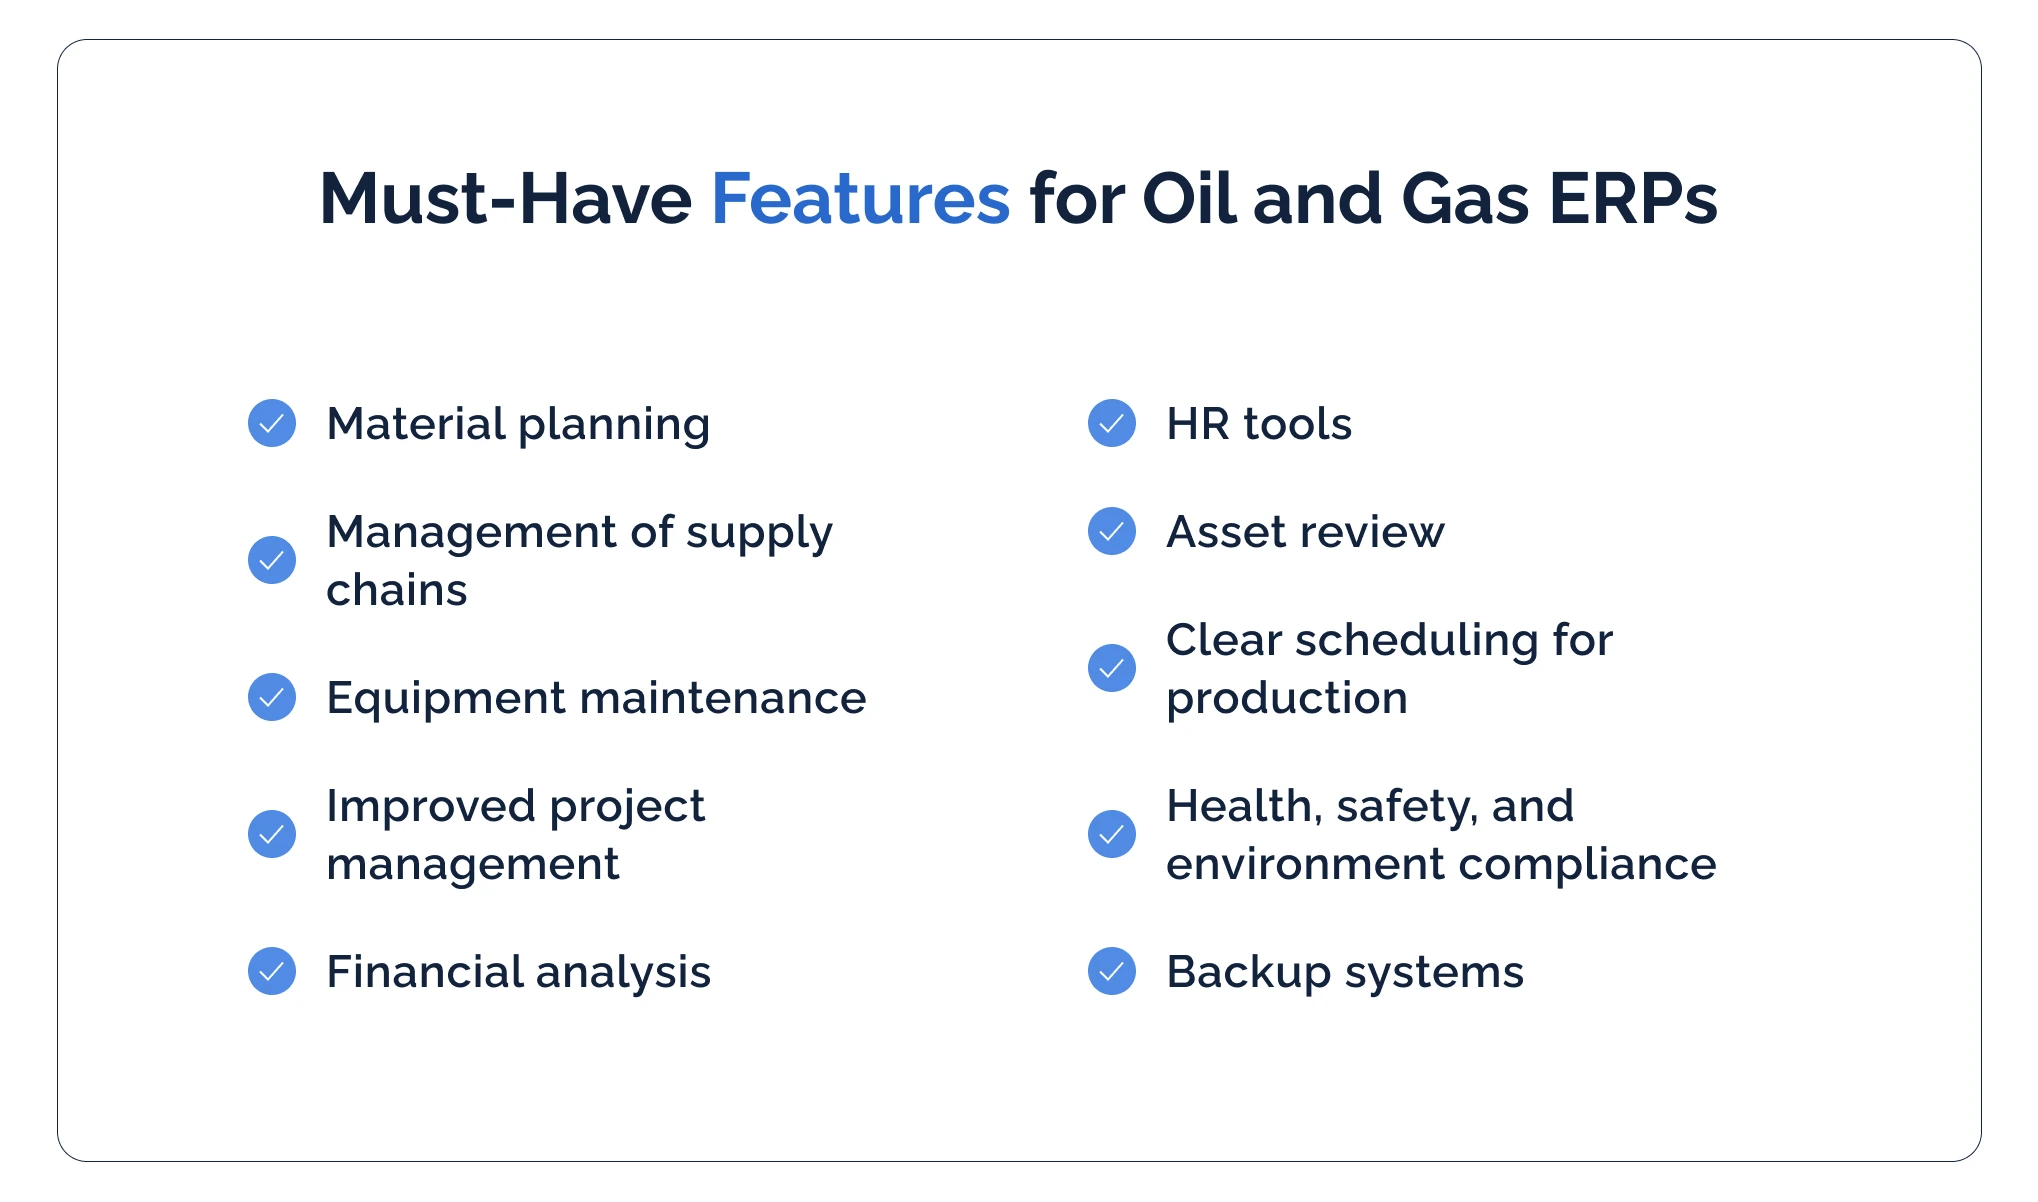 Must-have features for oil and gas ERPs